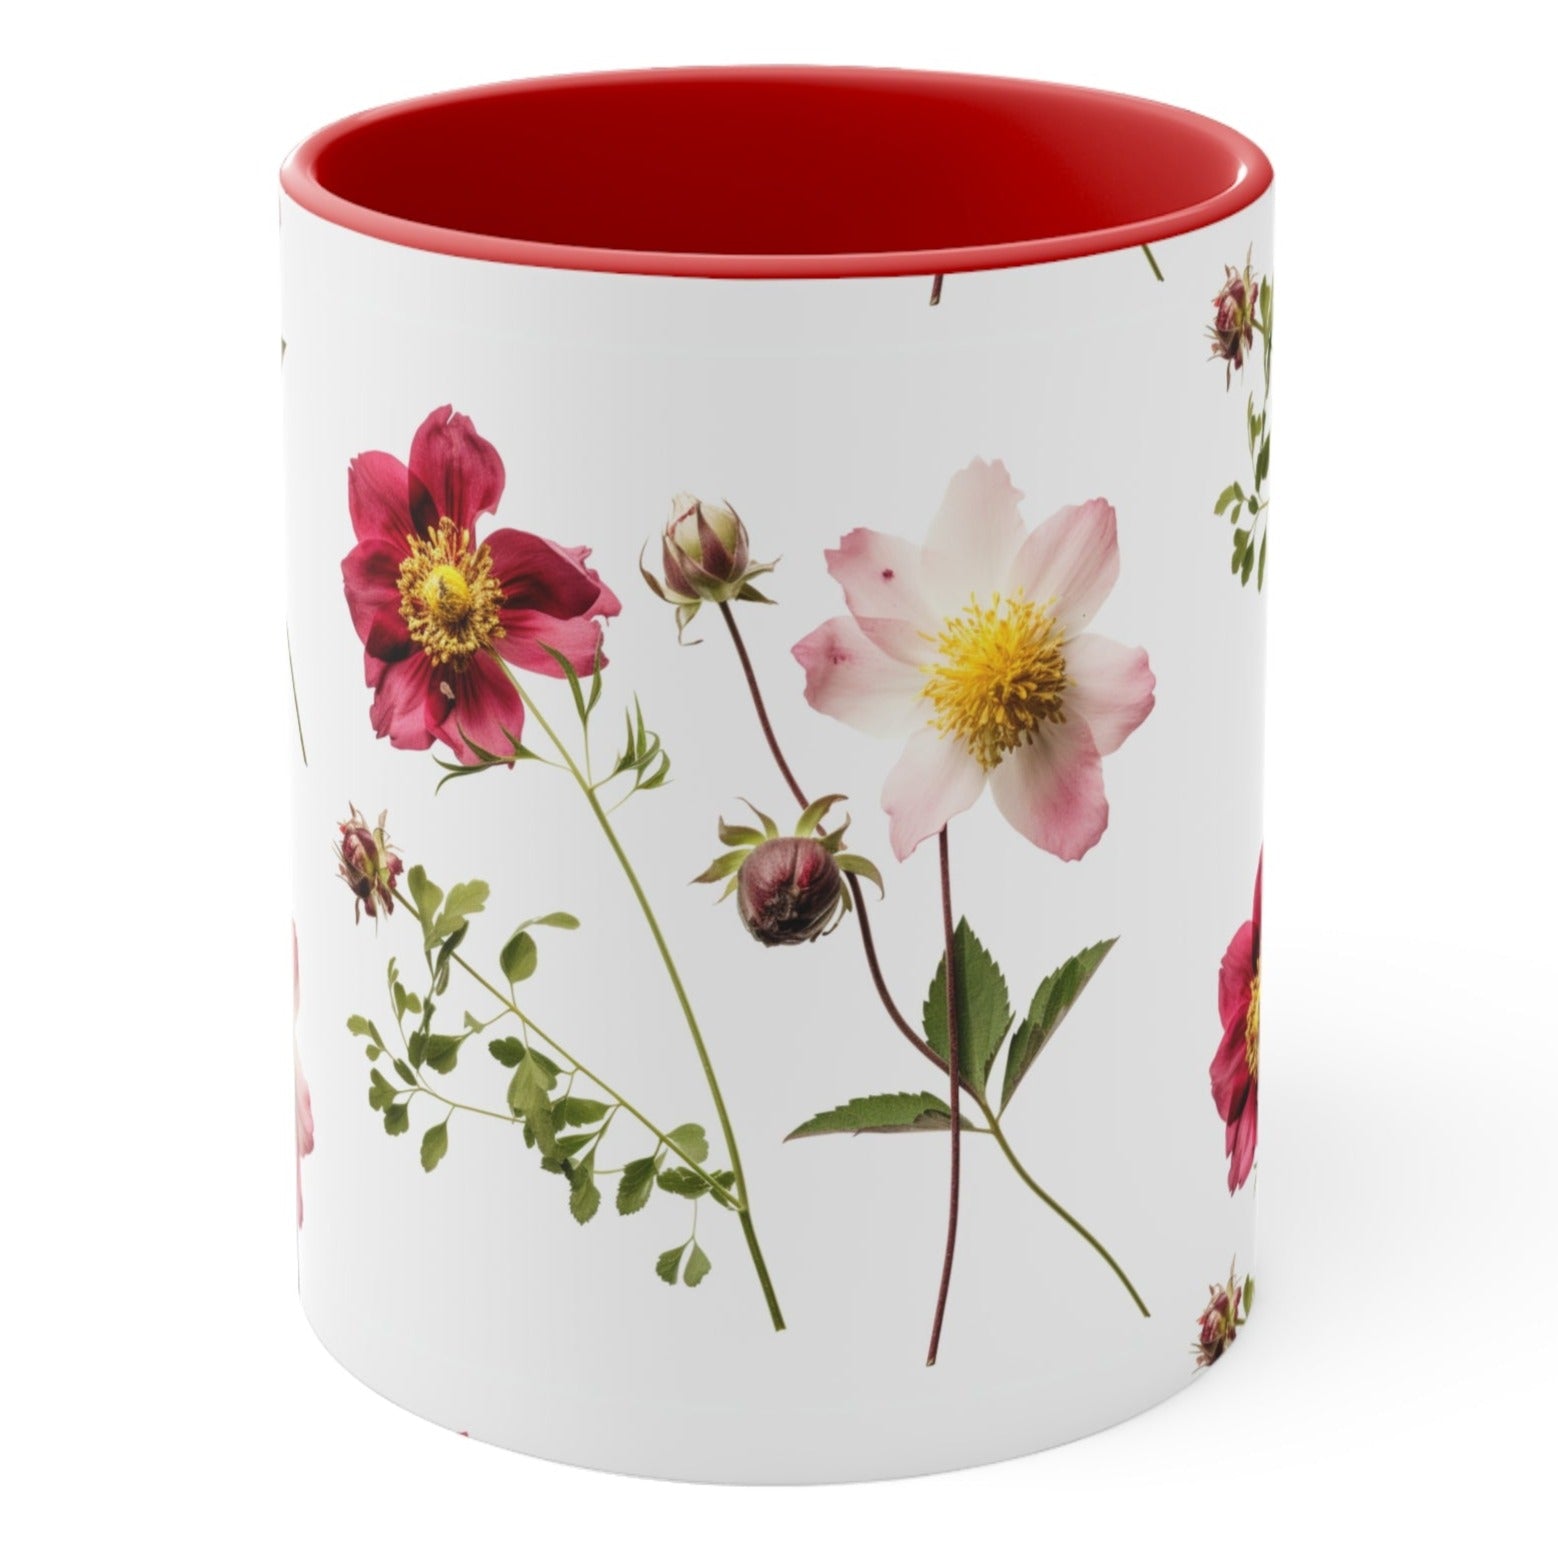 Beautiful Coffee Mug with Floral Arrangement for Relaxing Morning. Perfect for Starbucks Cawfee.